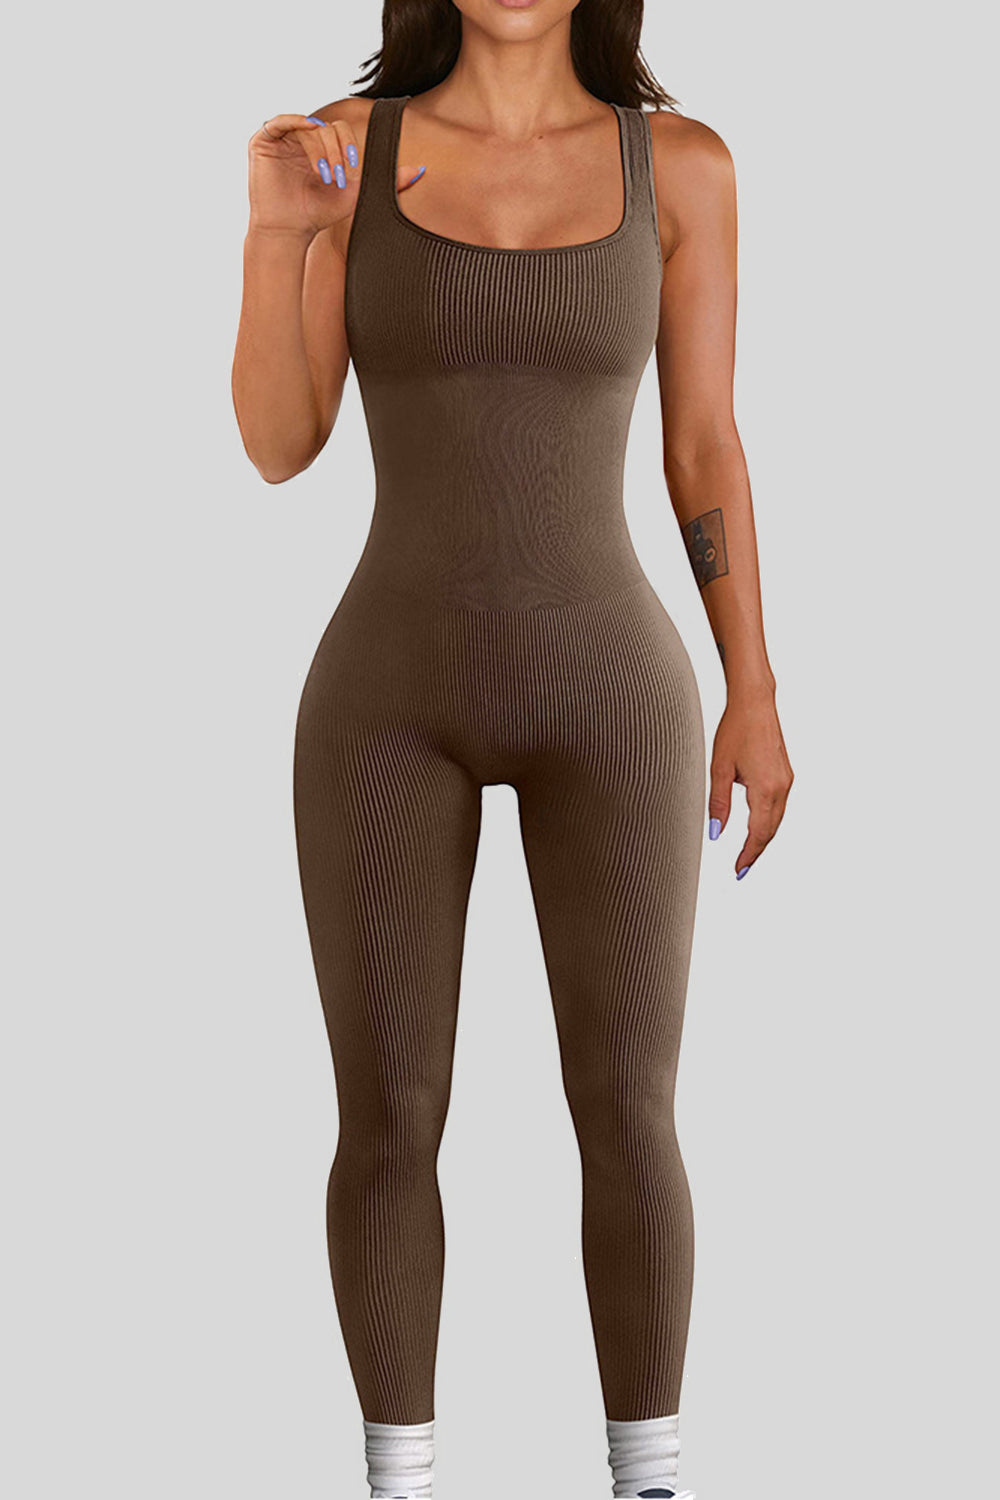 Square Neck Wide Strap Jumpsuit Sunset and Swim Chocolate S 